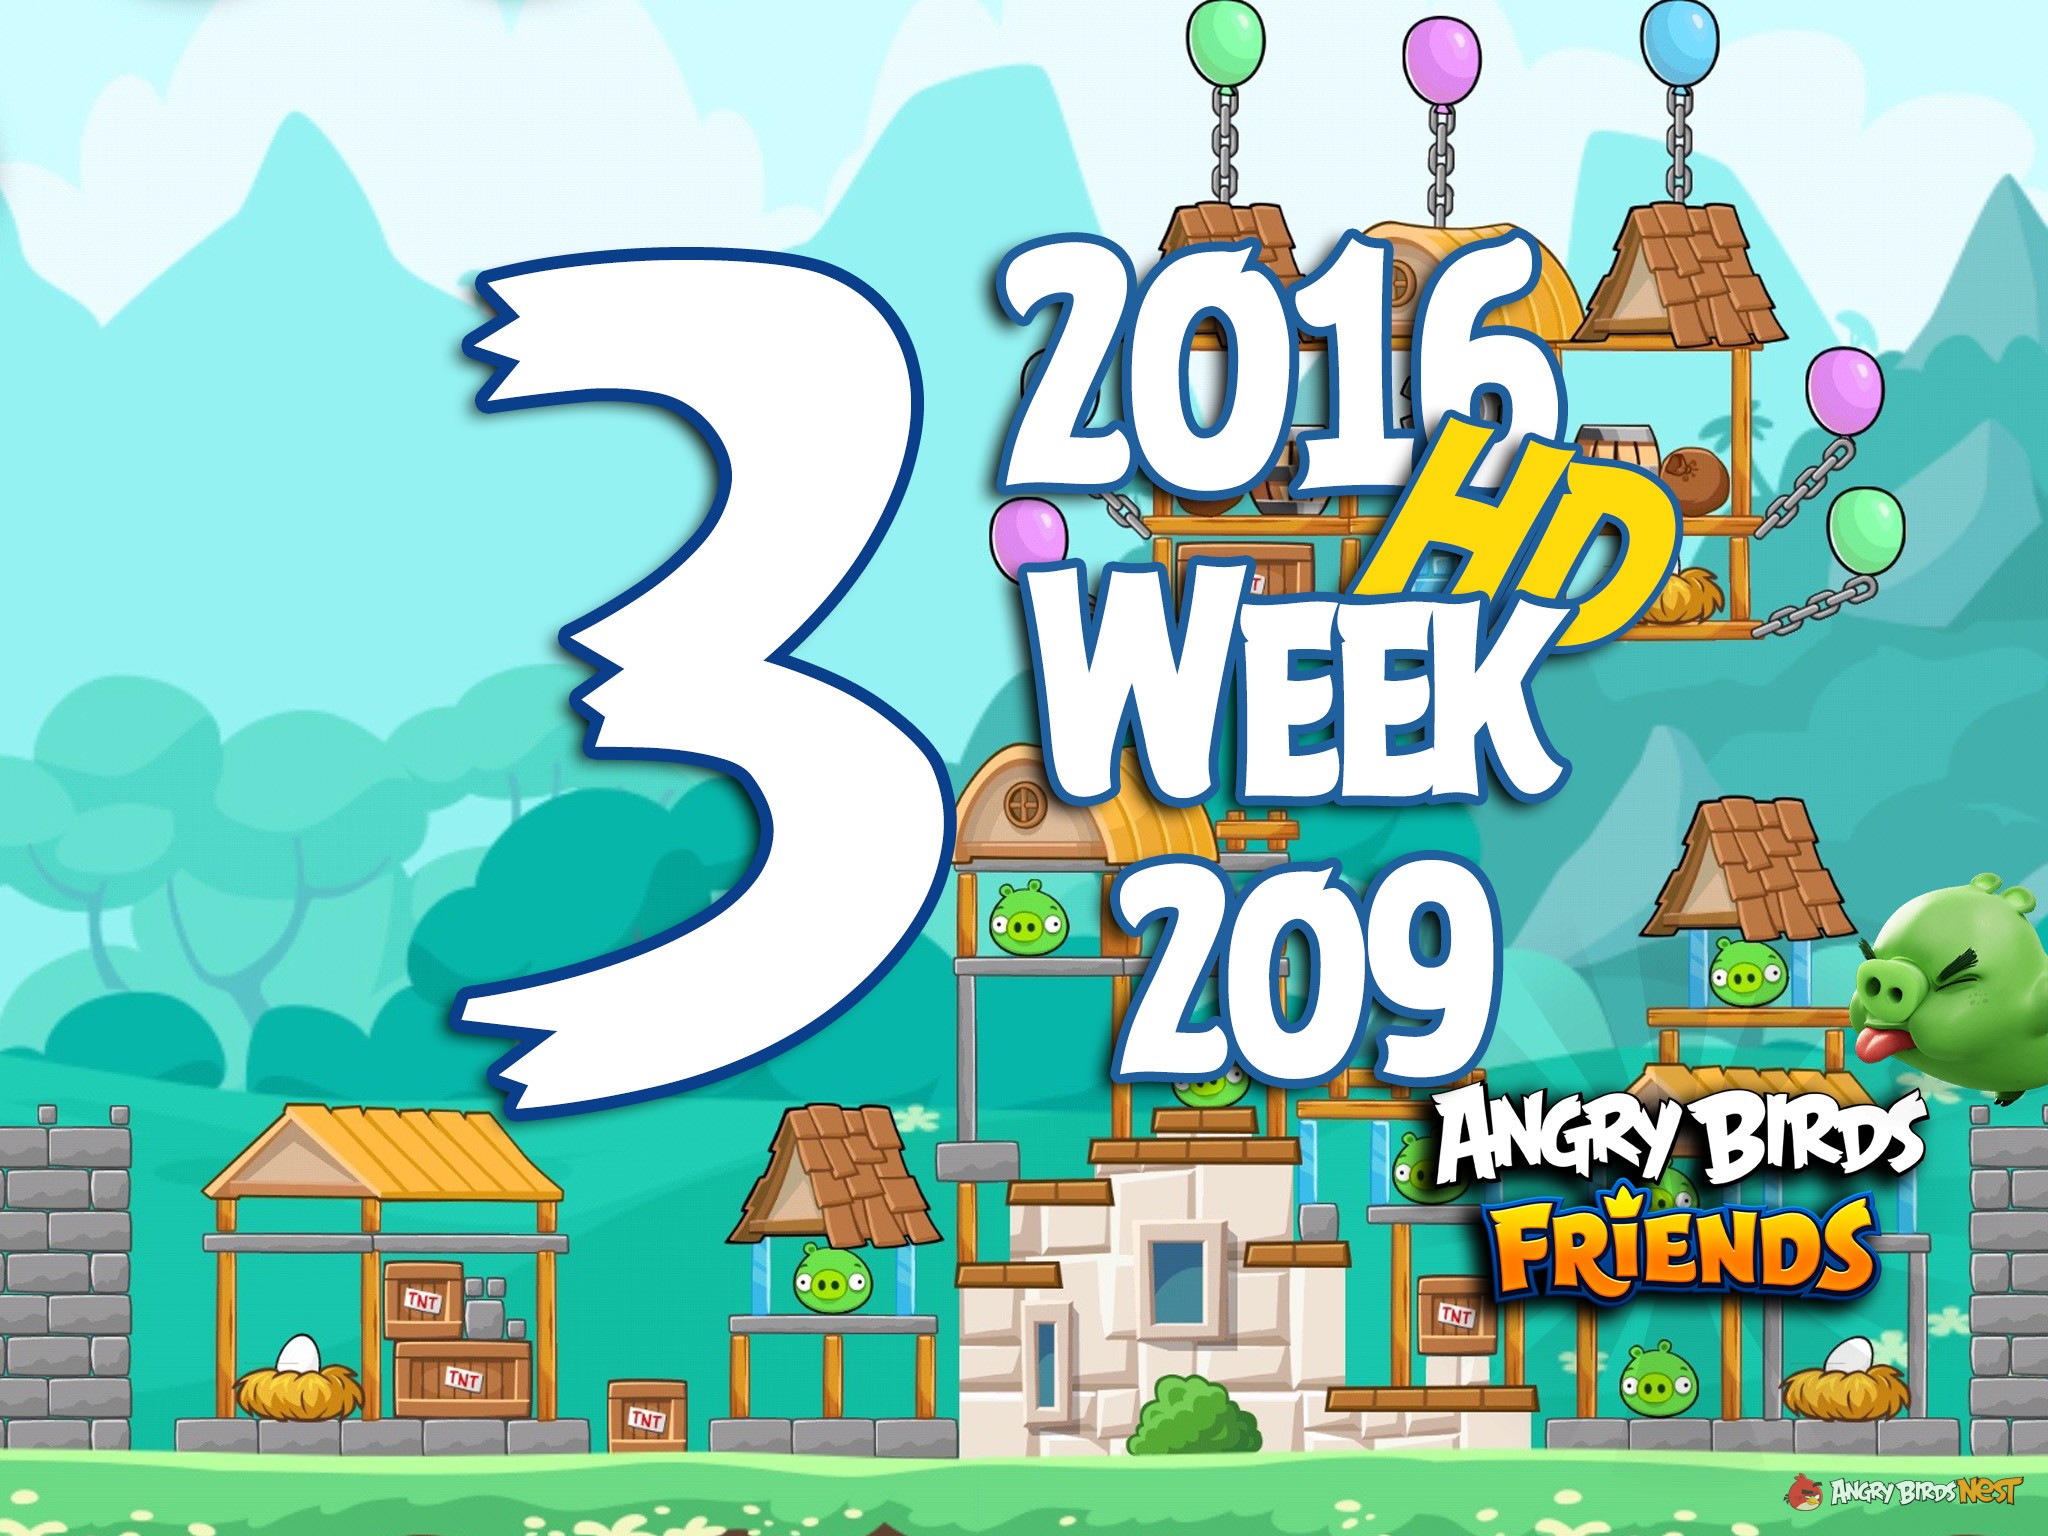 Angry Birds Friends Tournament Level 3 Week 209 Walkthrough | May 19th 2016